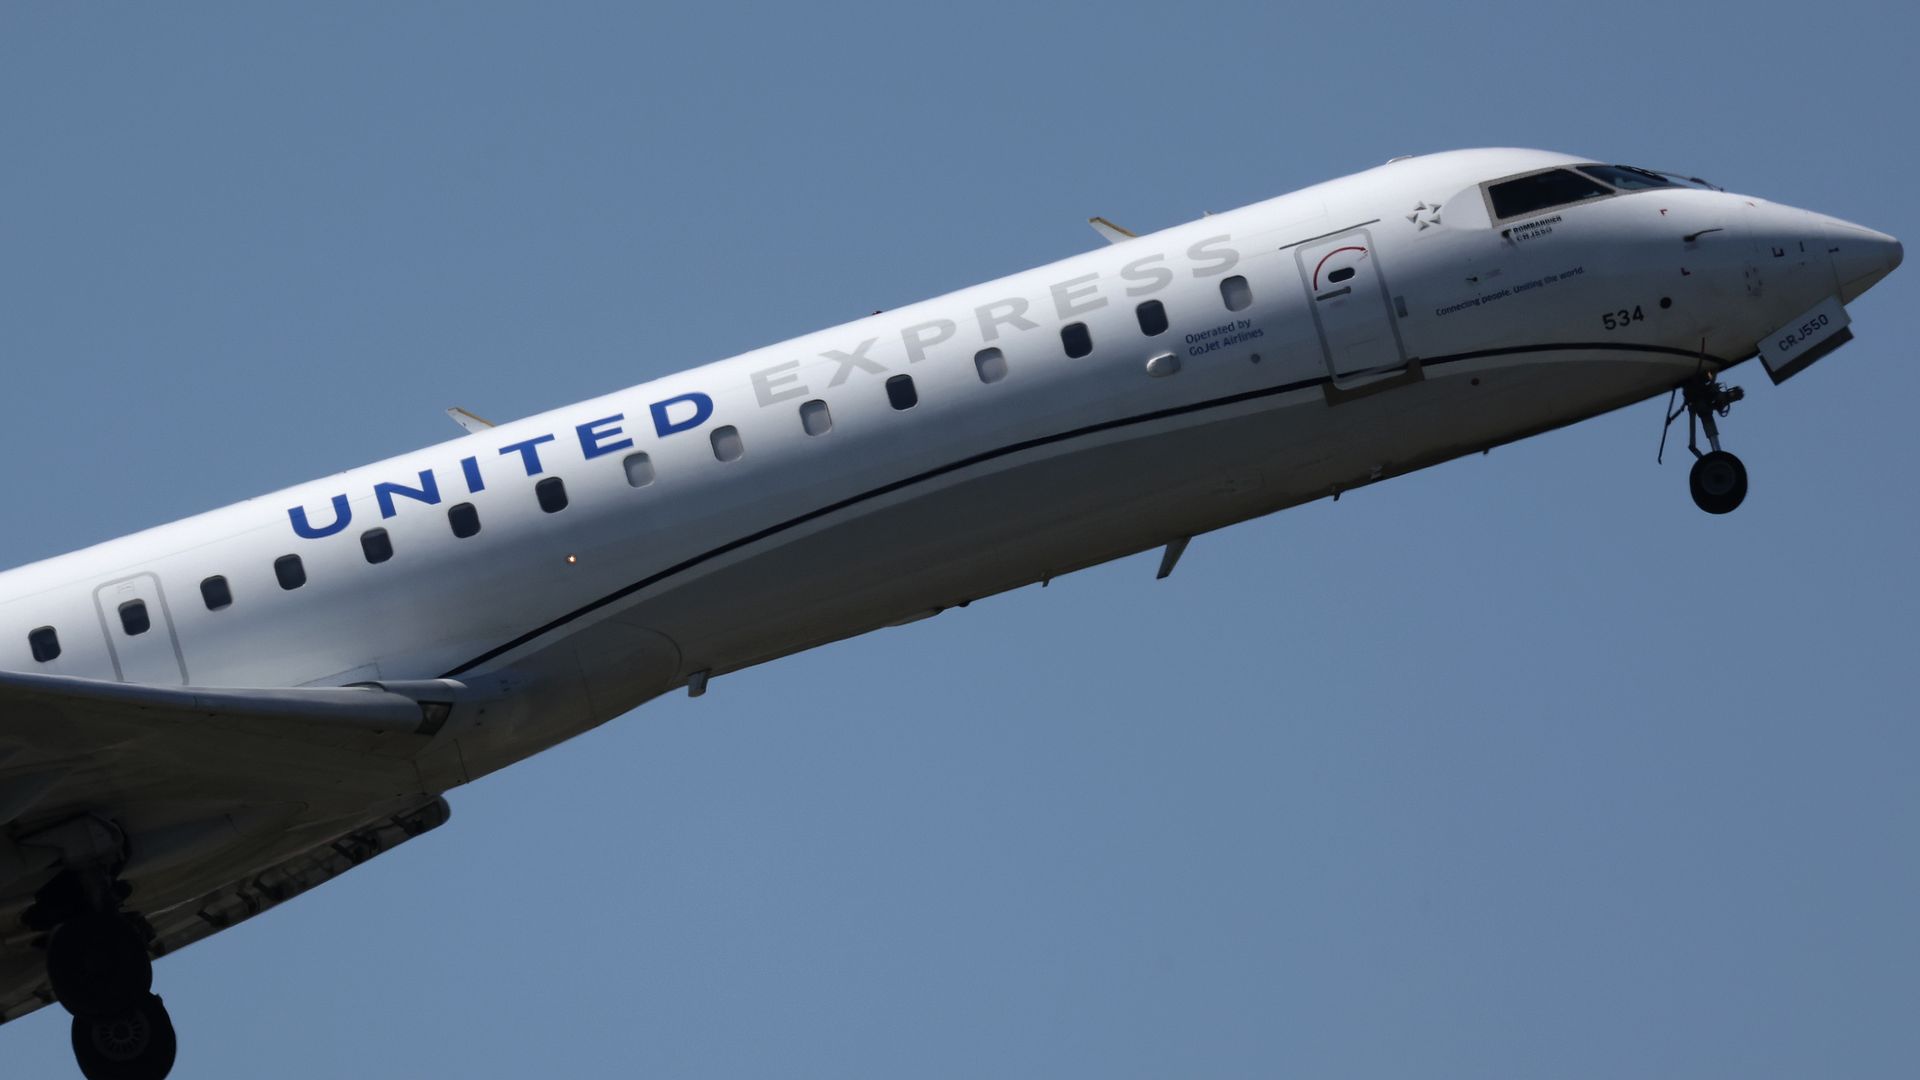 A United Airlines flight departing from Reagan National Airport in Washington D.C., On Sept. 1.